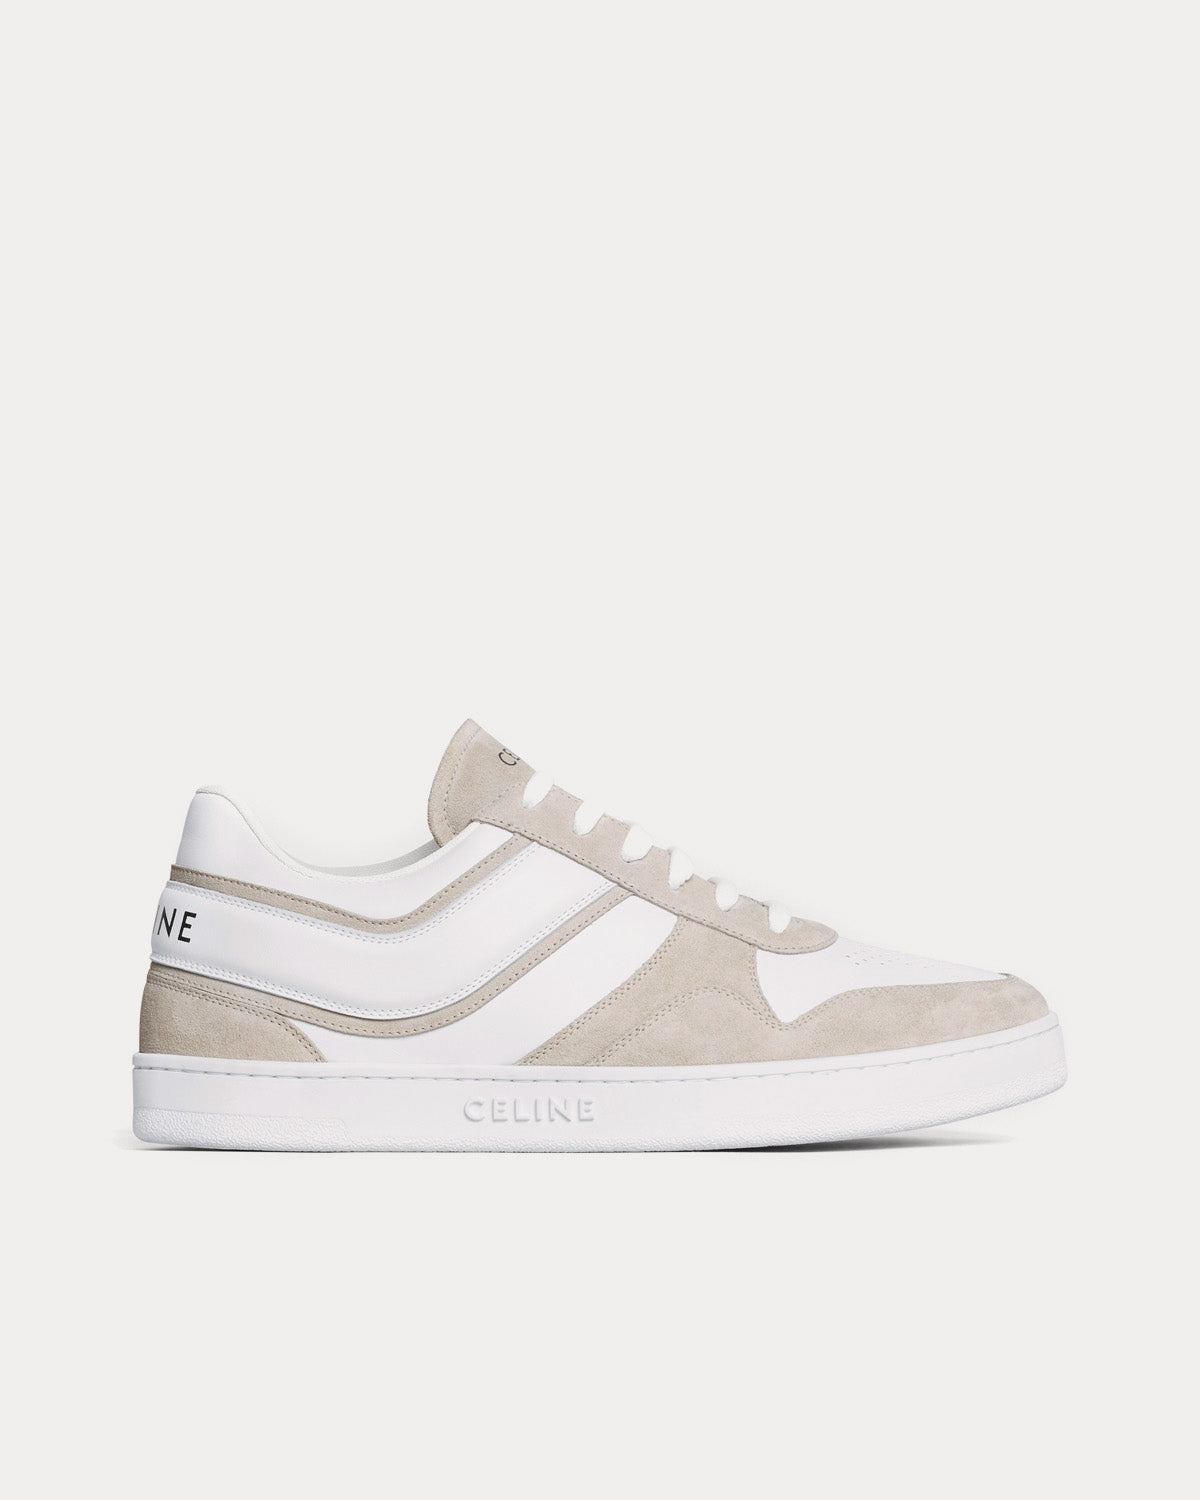 Celine - Lace-Up Suede & Calfskin Leather Light Beige / Optic White Low Top Sneakers